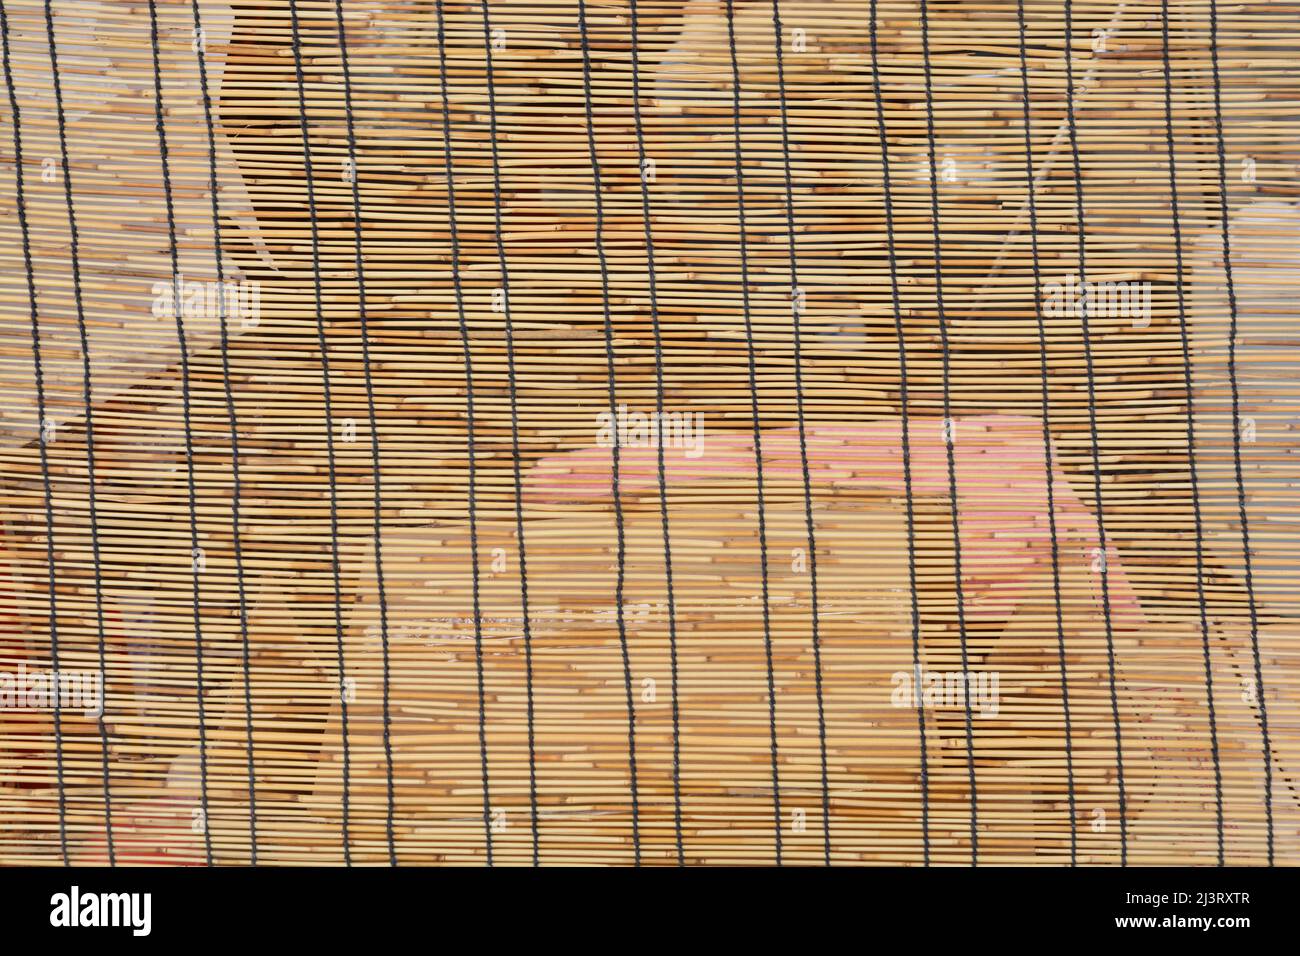 bamboo curtain, bamboo wooden curtain texture pattern for background Stock Photo